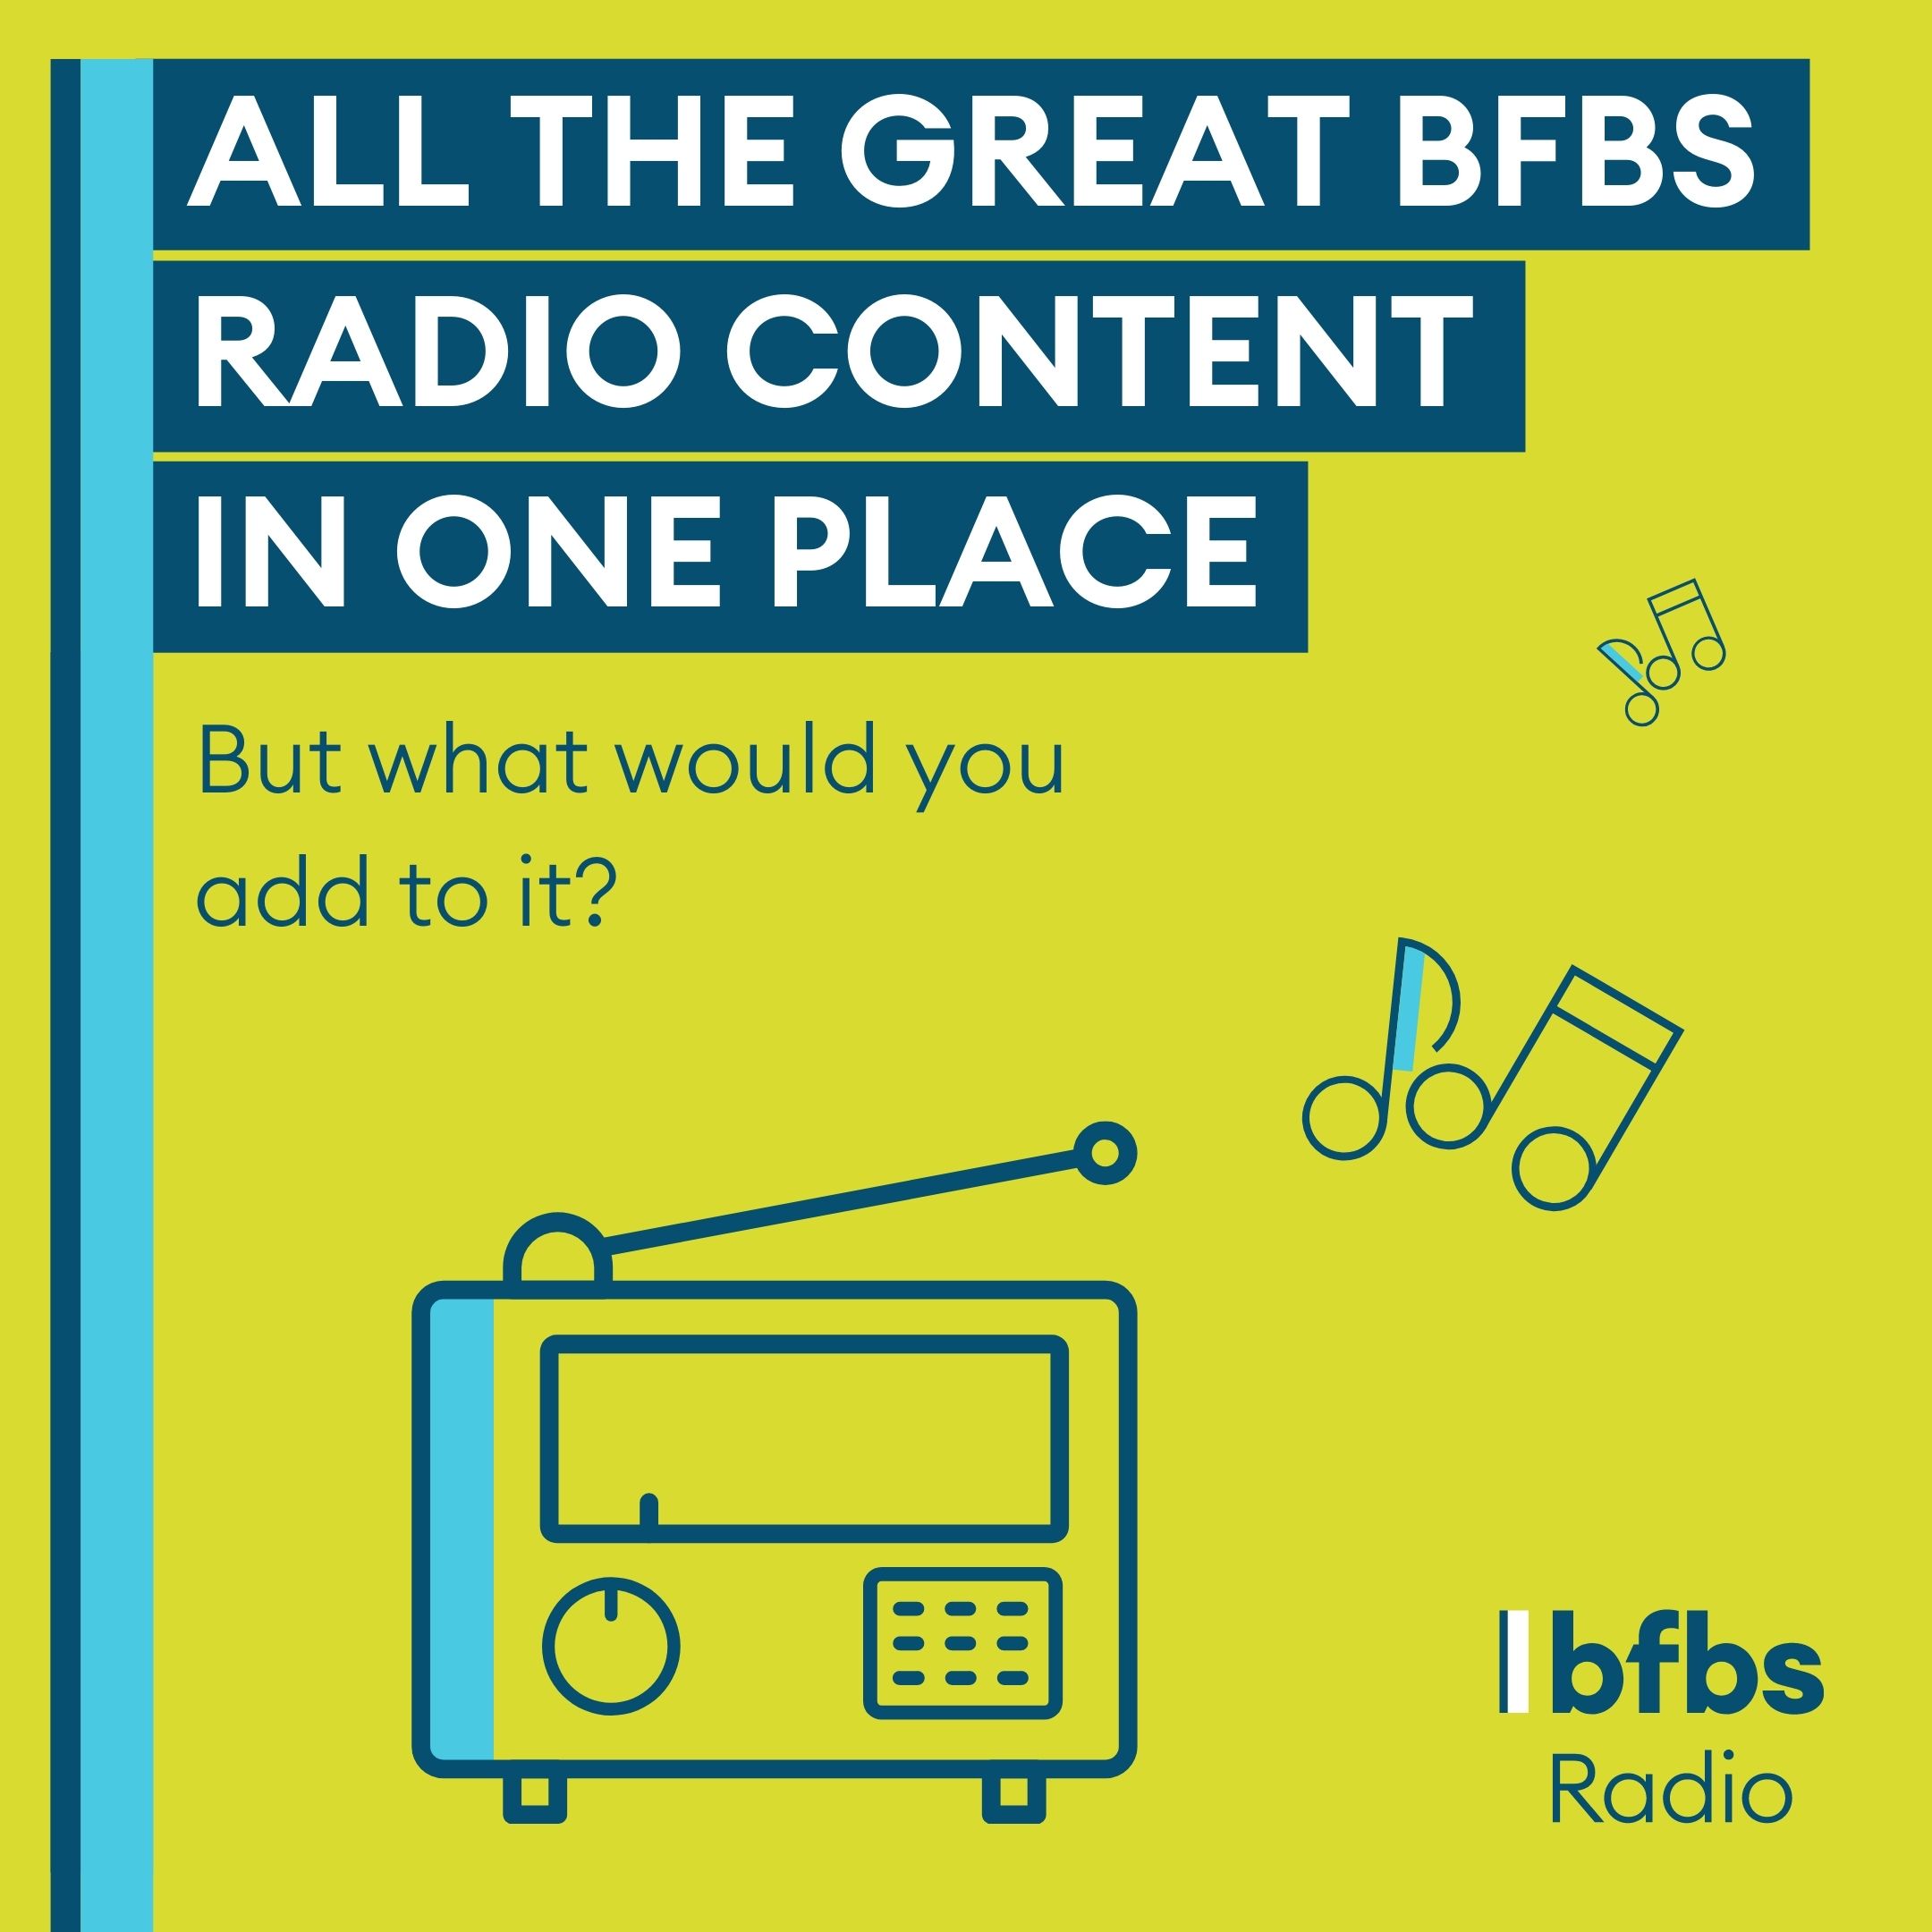 BFBS Announces New Radio App And Gives Listeners The Chance To Choose A New Music Station